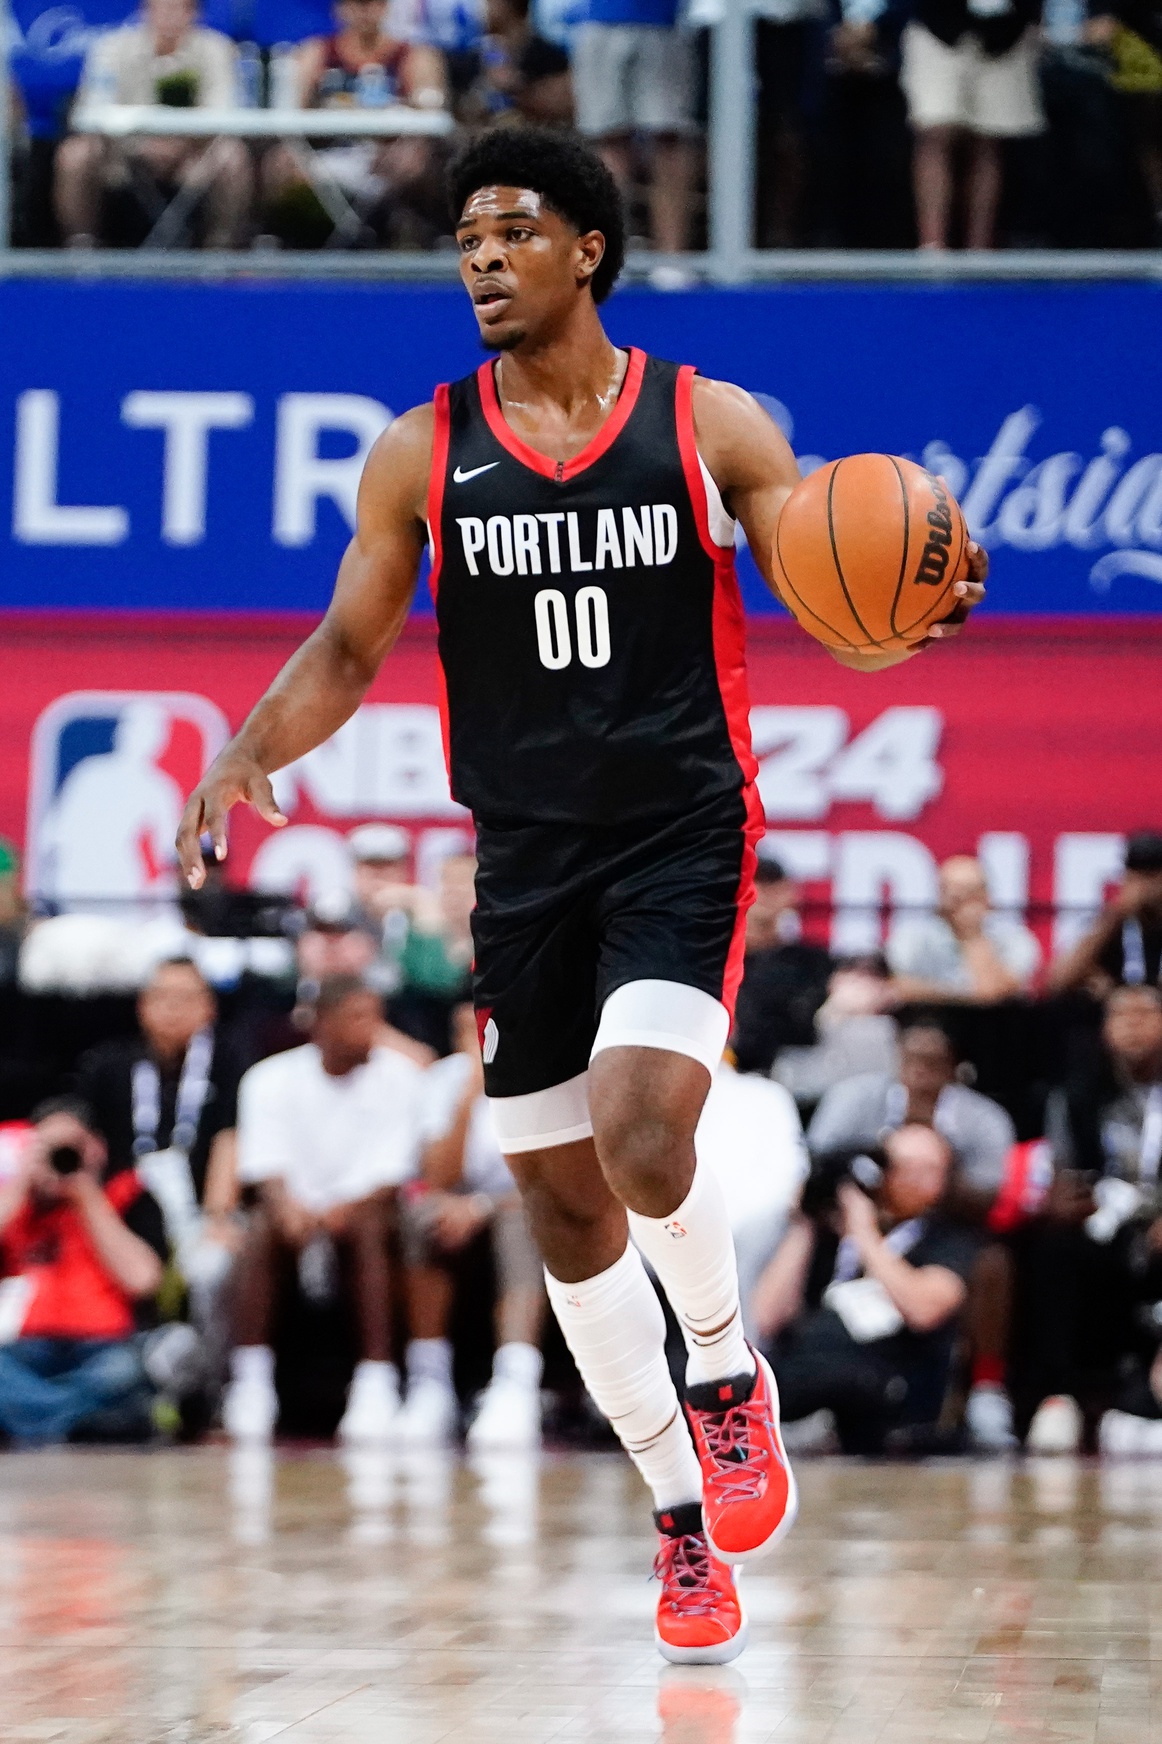 NBA: Jul 7, 2023; Las Vegas, NV, USA; Portland Trail Blazers guard Scoot Henderson (00) dribbles the ball against the Houston Rockets during the first half at Thomas & Mack Center. Mandatory Credit: Lucas Peltier-USA TODAY Sports